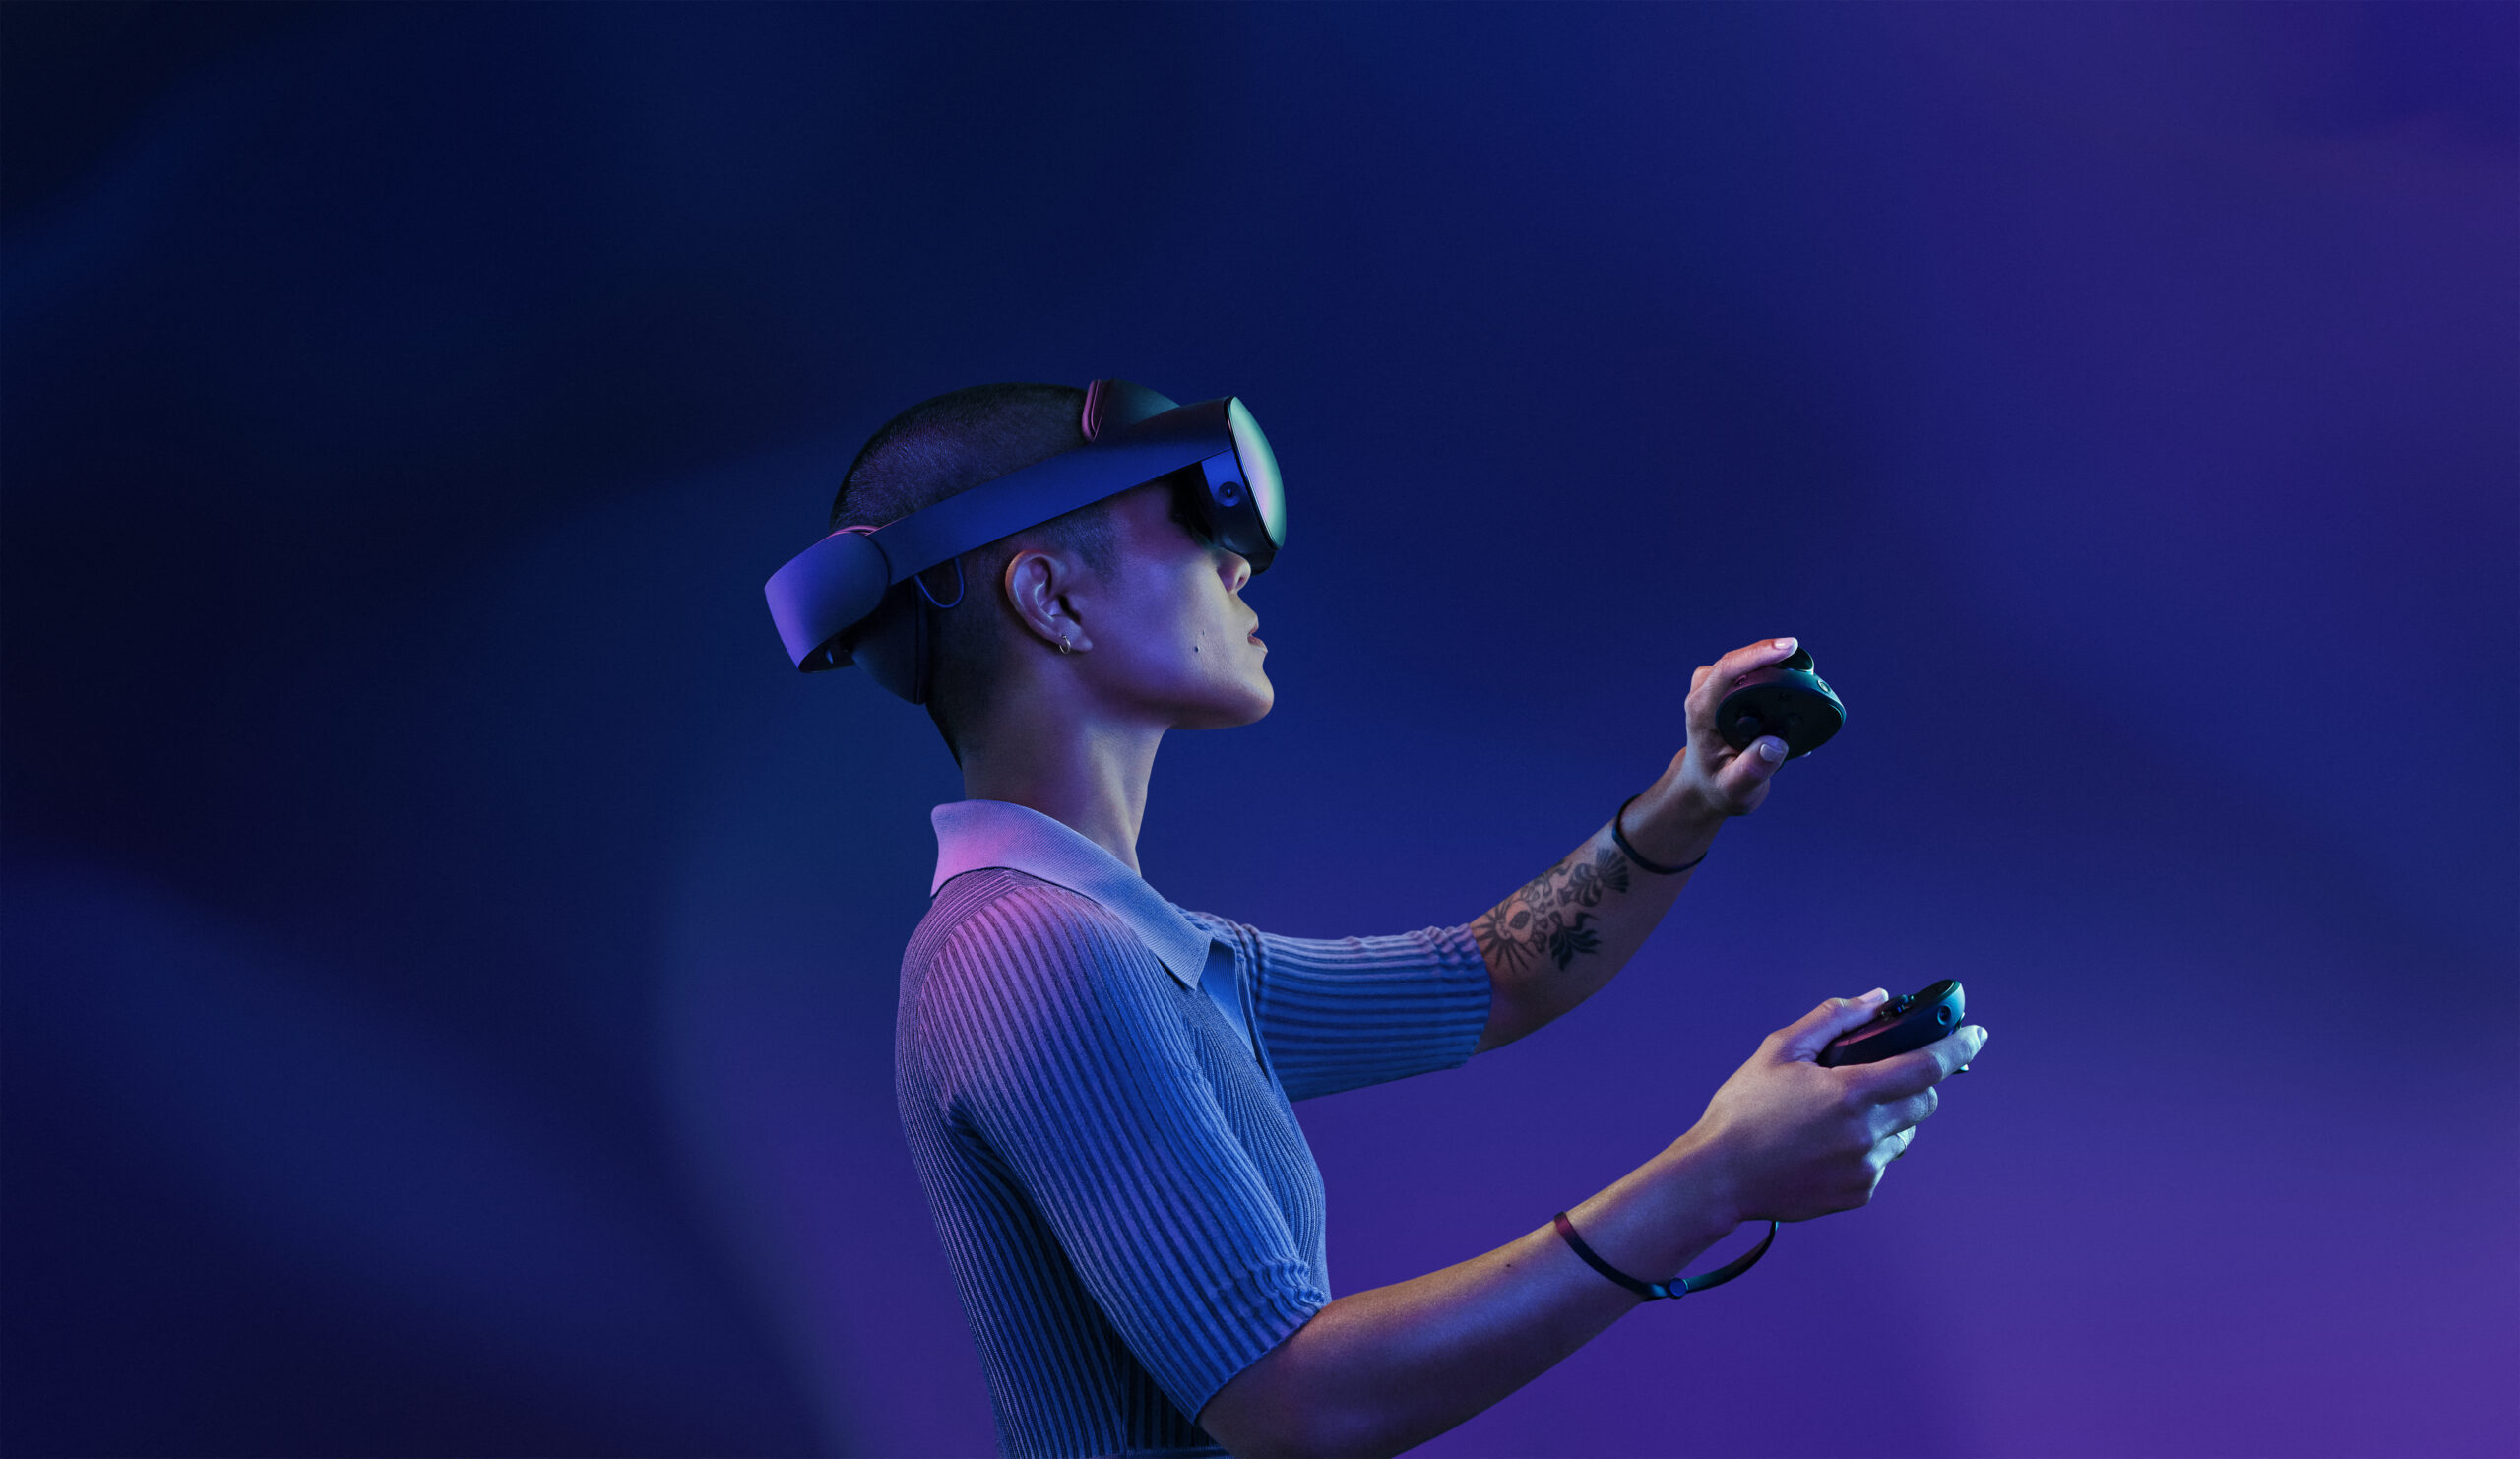 Meta continues to shovel money into the growing VR gaming segment